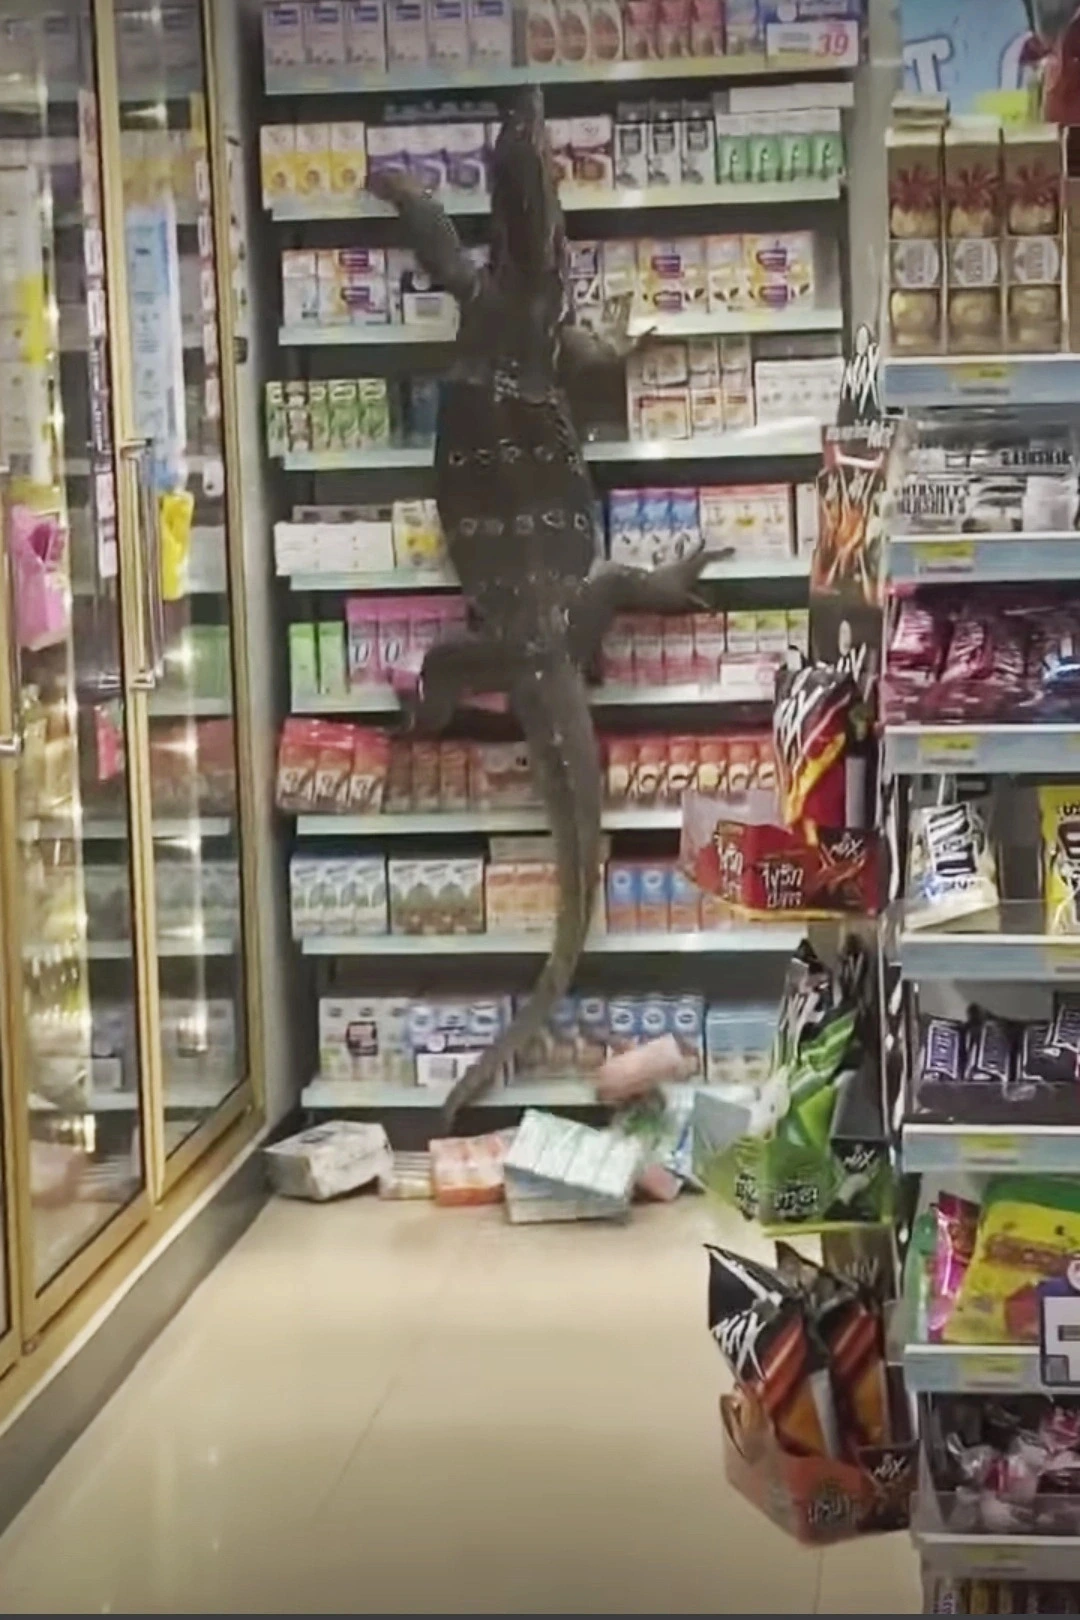 Terrifying video shows godzilla-like lizard ransacking 7-eleven store in search of food